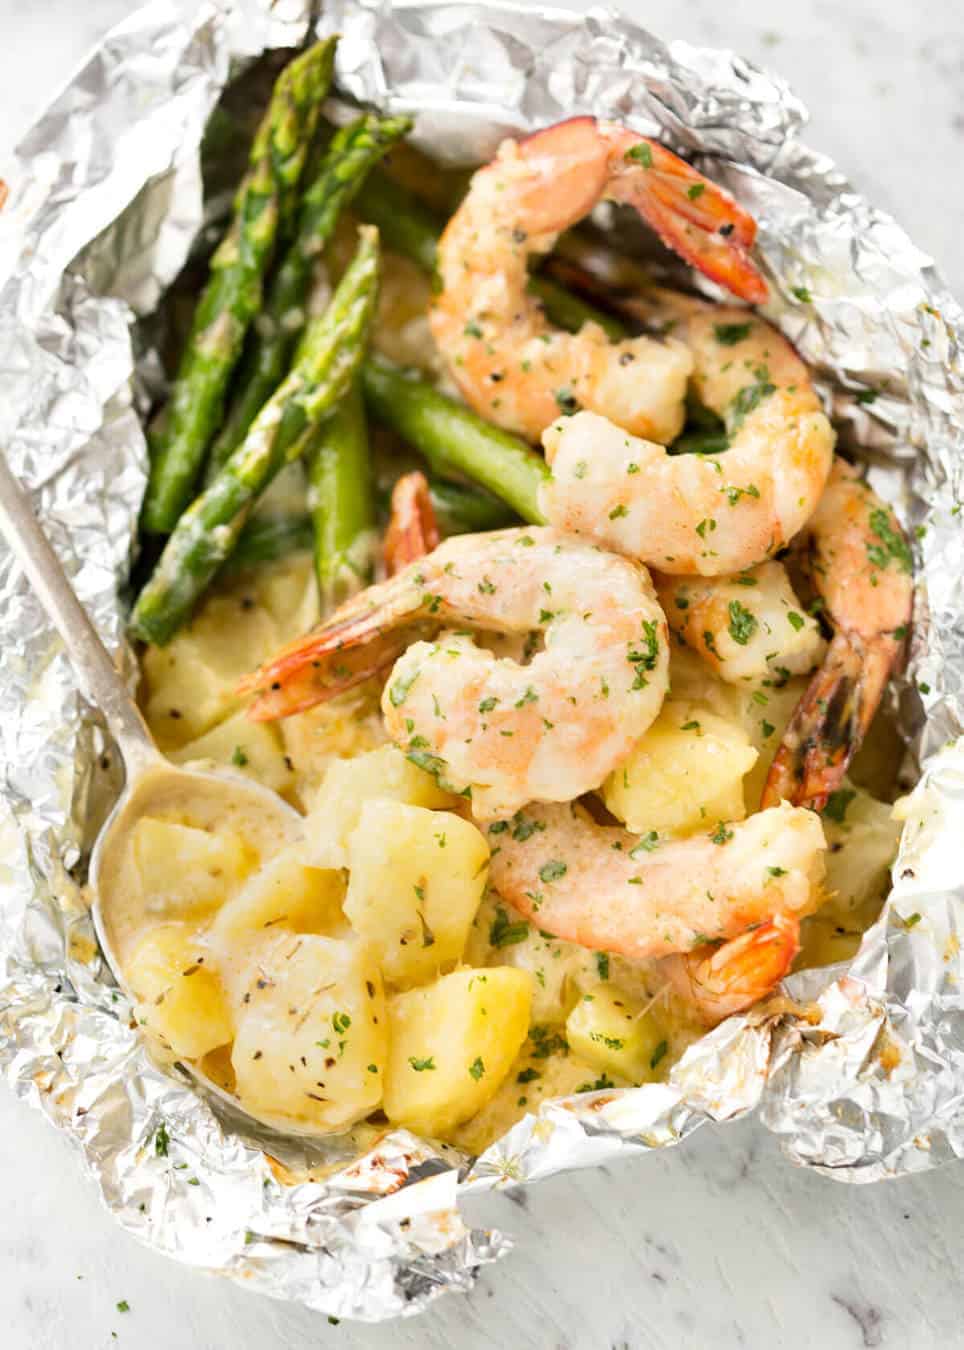 Creamy Garlic Shrimp, Cheesy Potatoes and asparagus - serious contender for the BEST foil packet recipe ever! recipetineats.com